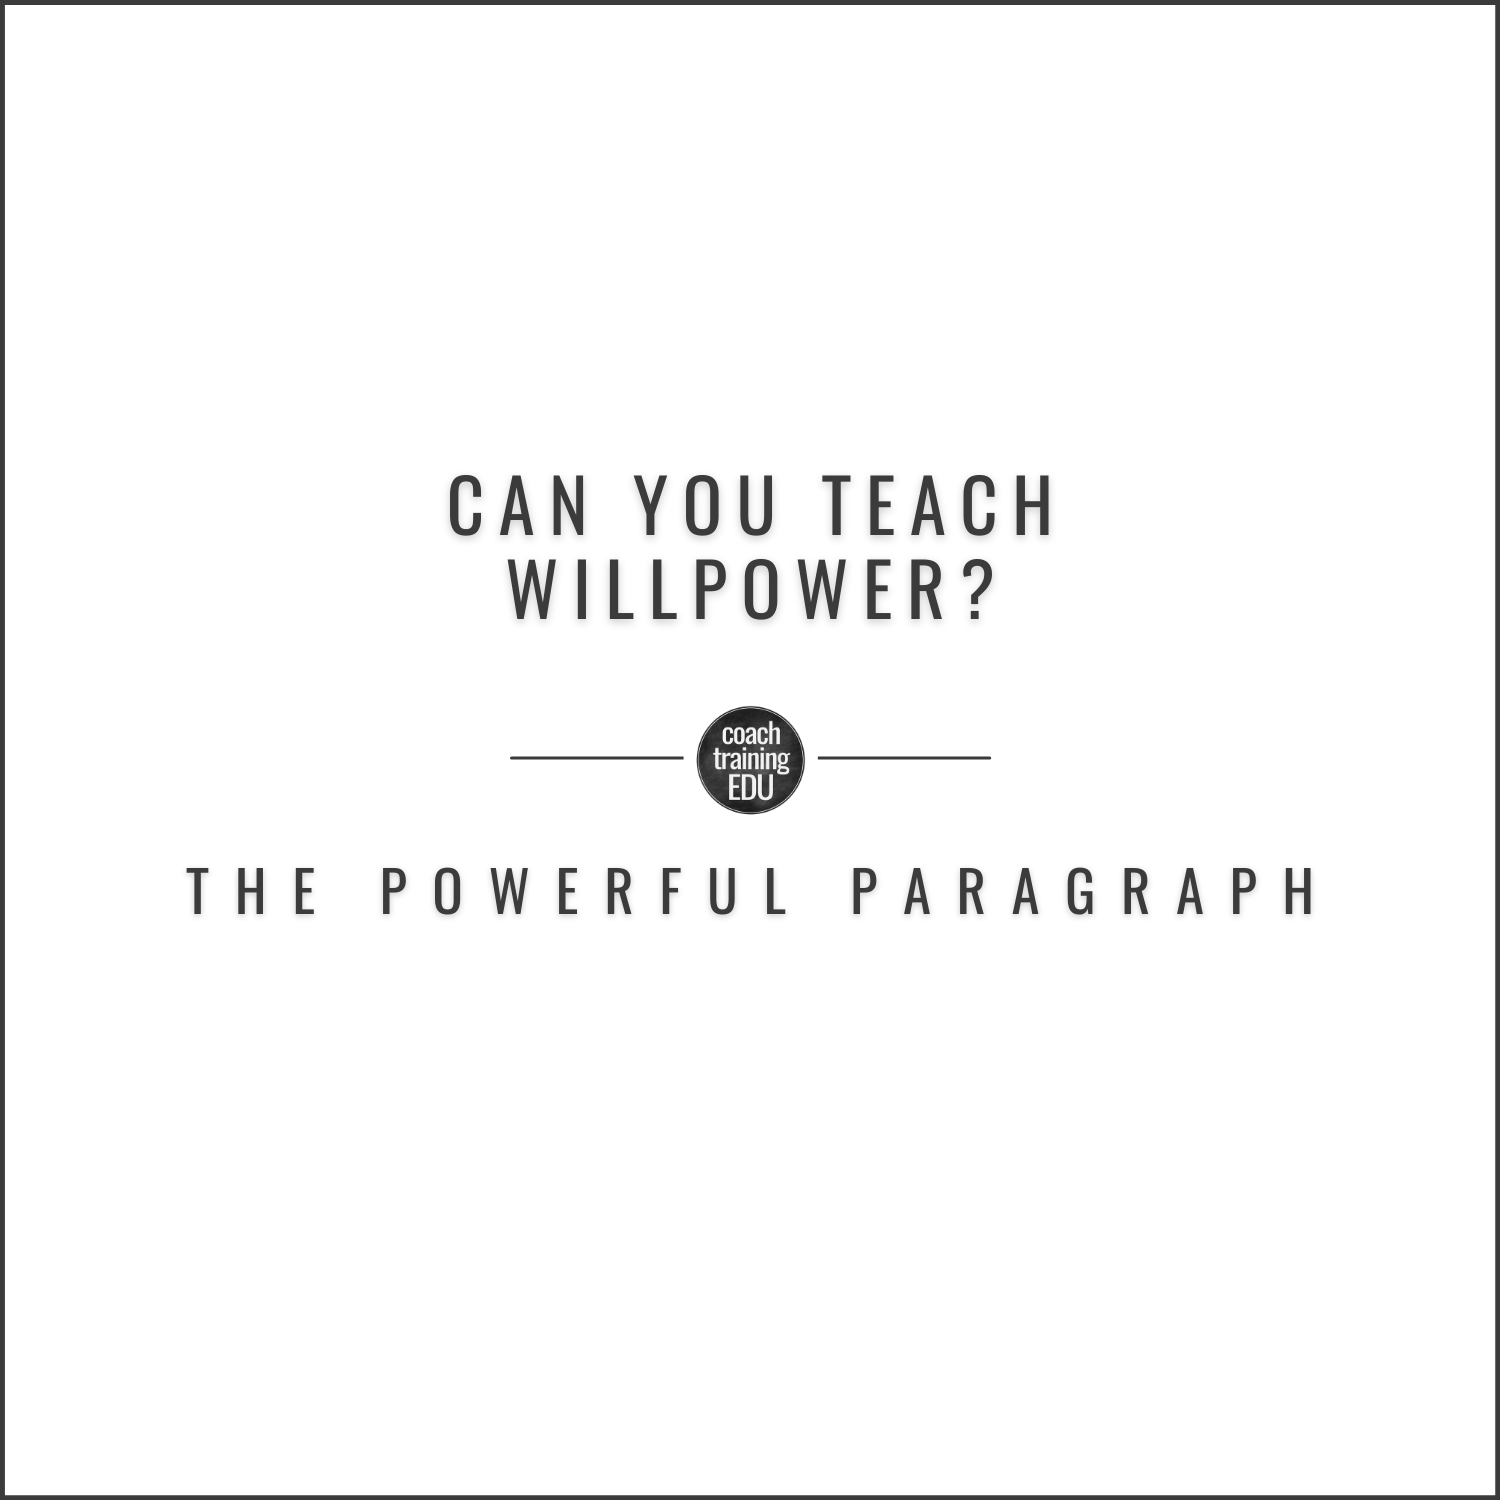 Can You Teach Willpower?